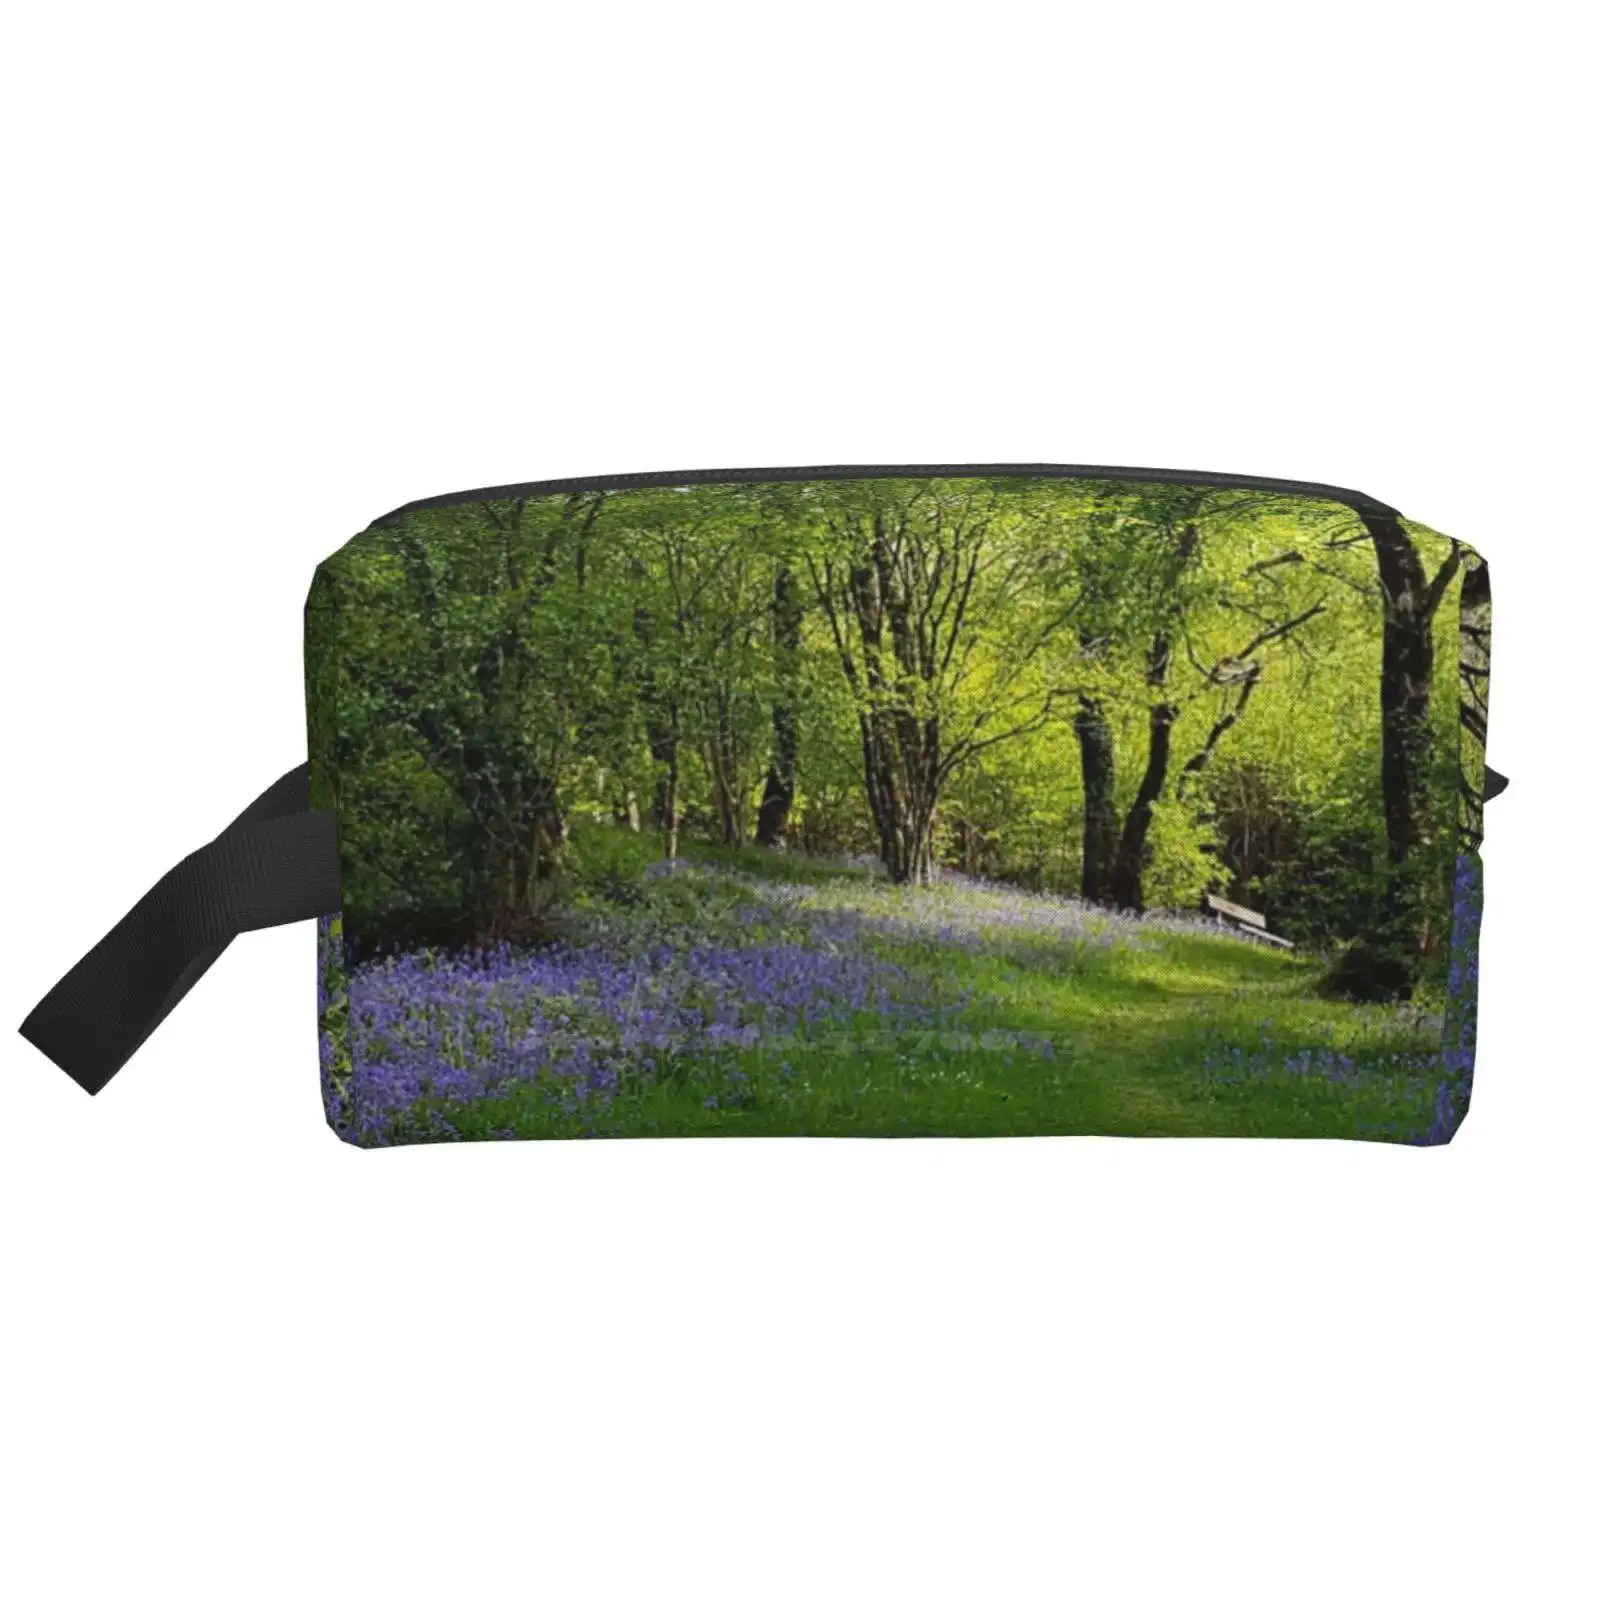 

Respite On The Bluebell Trail Cosmetic Bag Travel Storge Bags Large Size Moneypenny Missmoneypenny Bluebells Wood Forest Trail